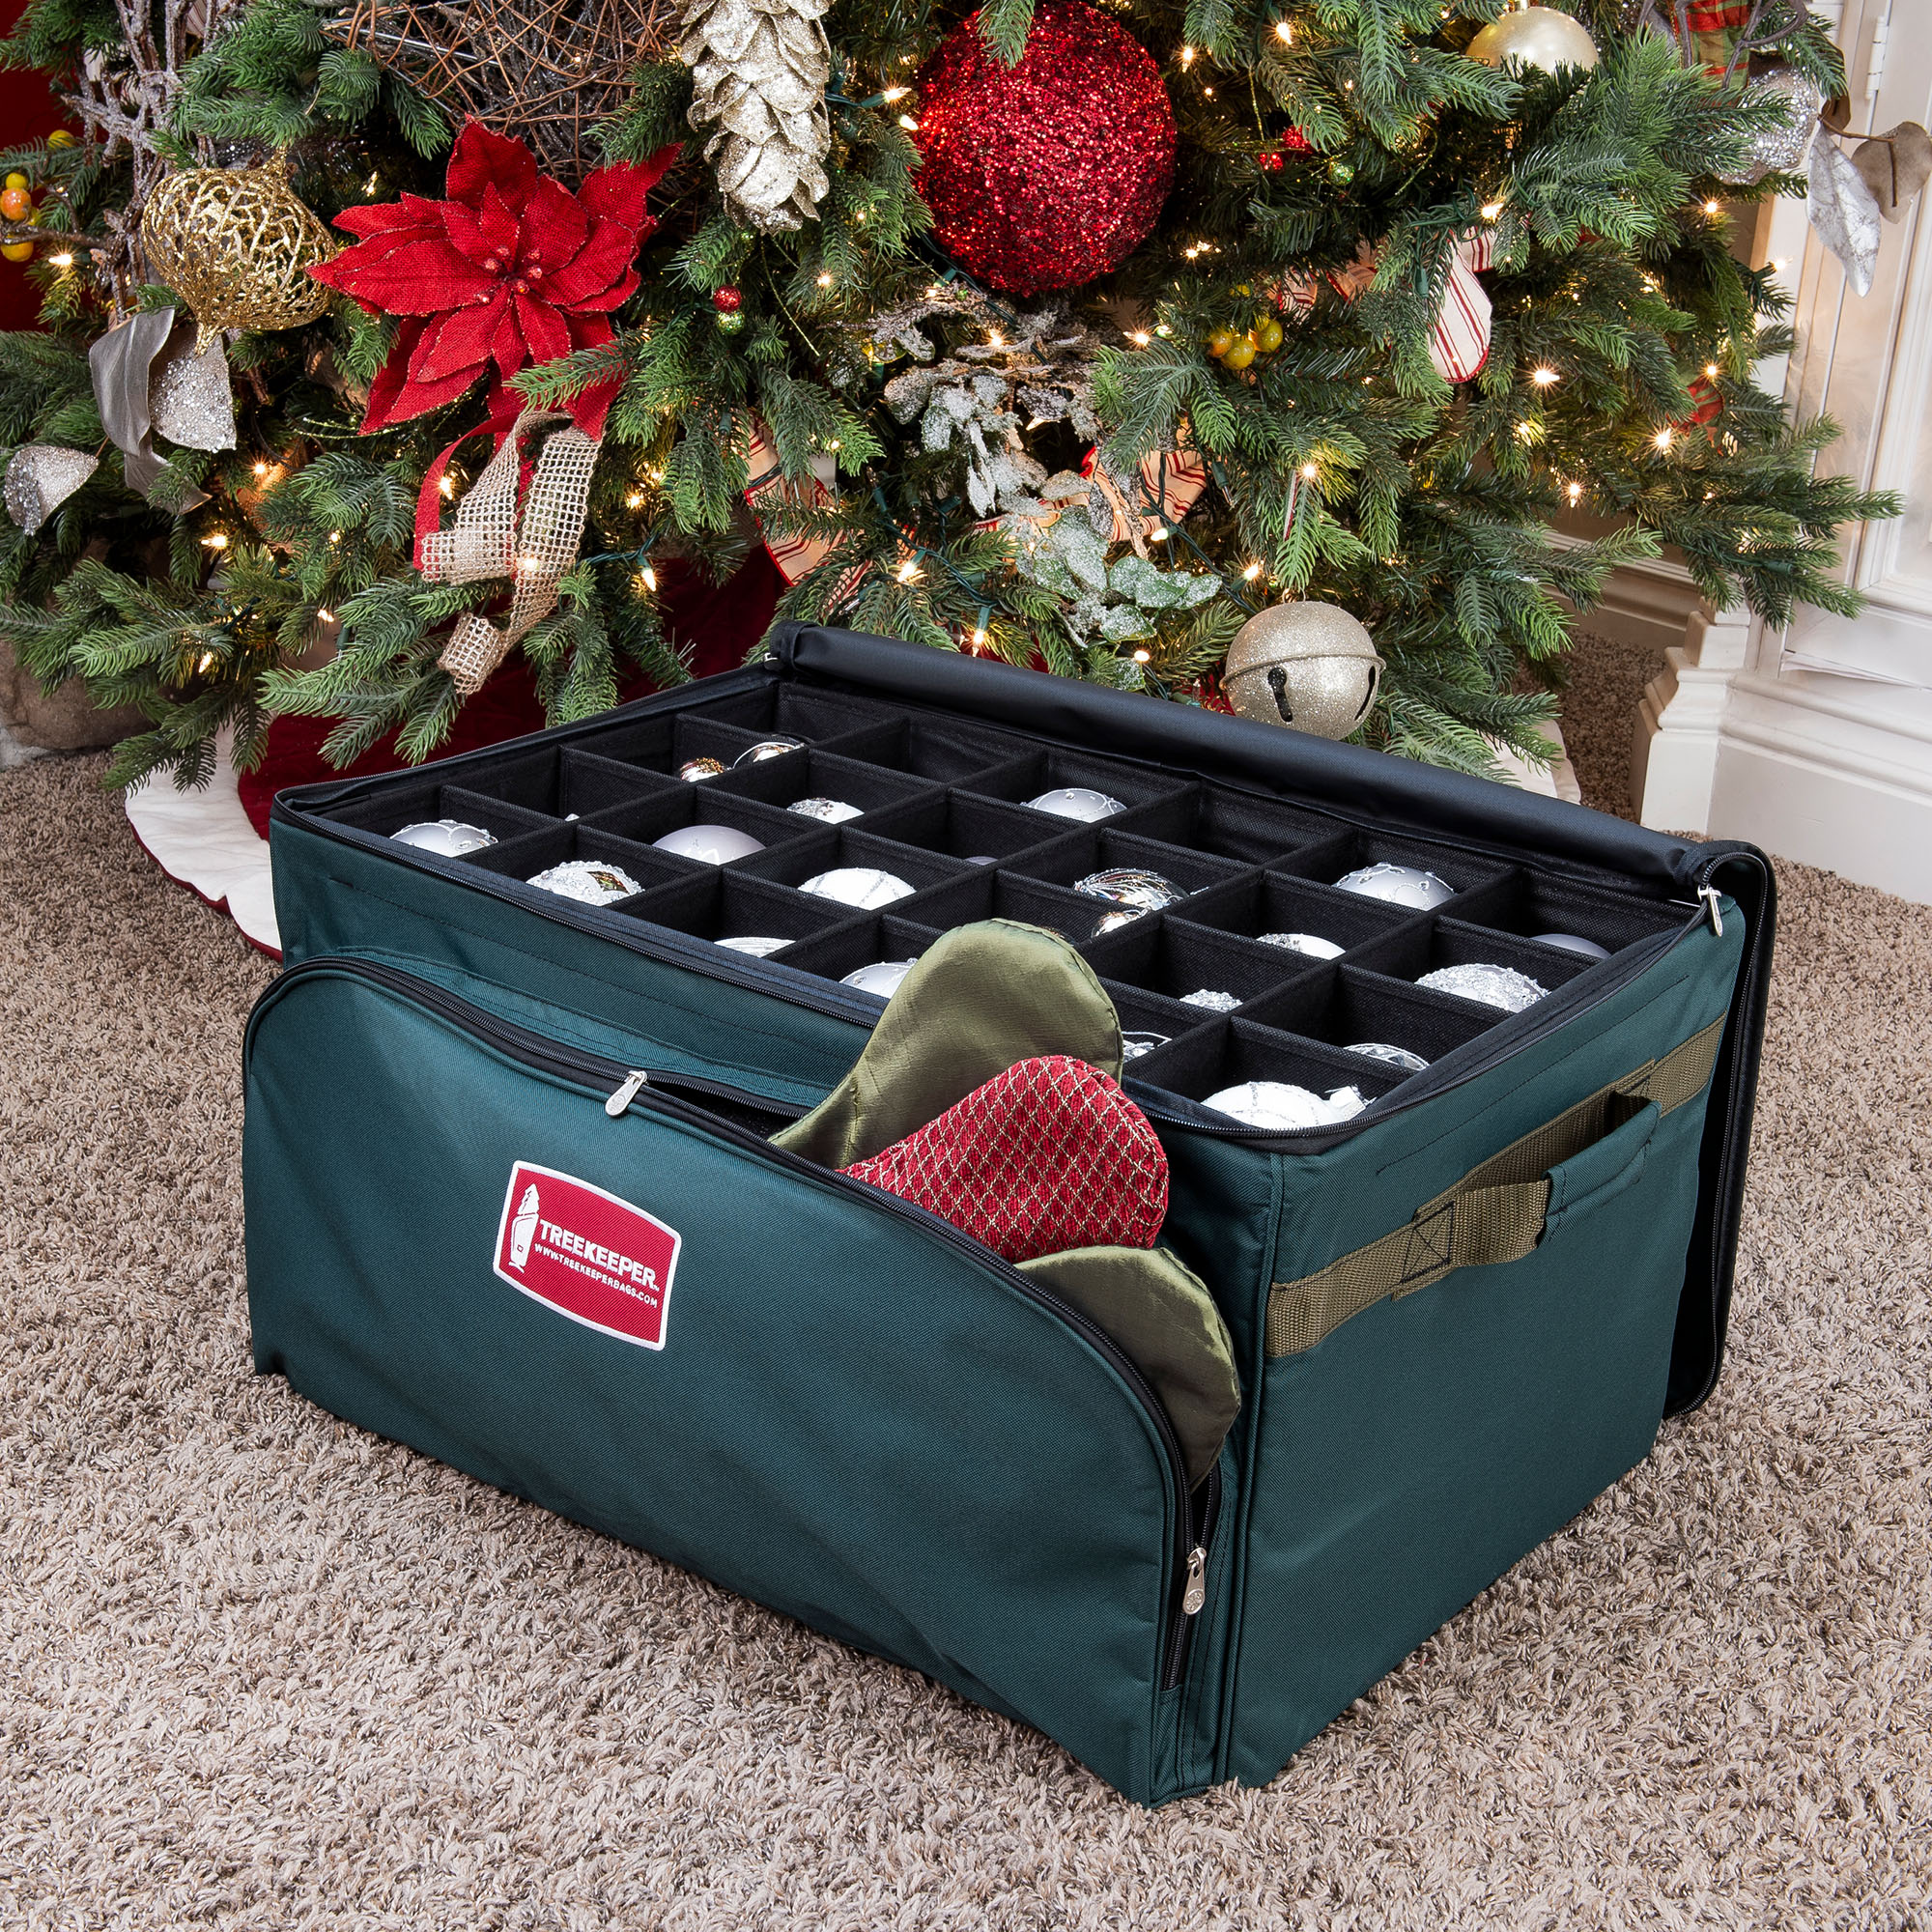 TreeKeeper 5 Tray Christmas Ornament Storage Box with Adjustable Dividers